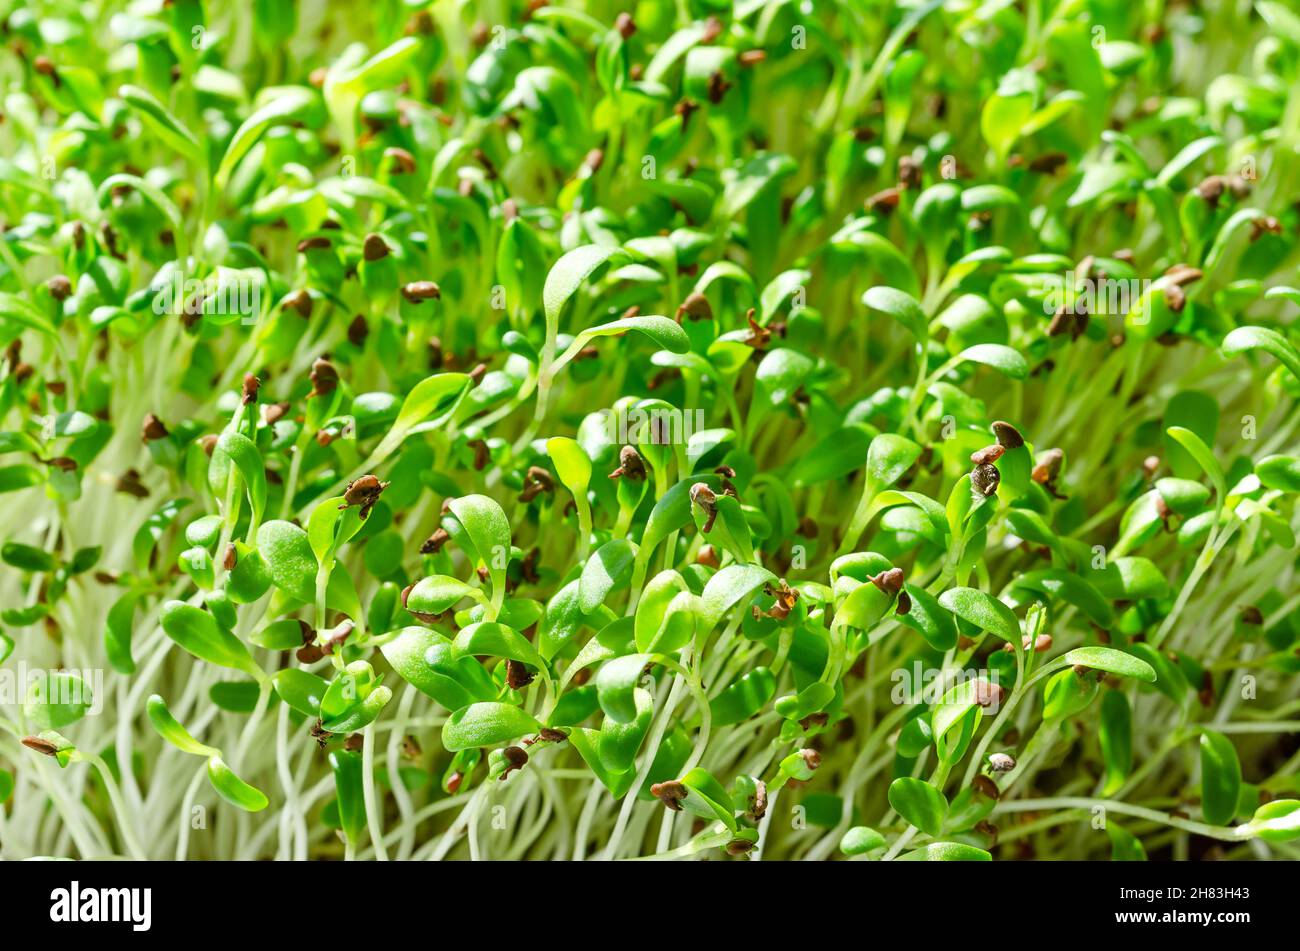 Alfalfa microgreens close up. Fresh and young lucerne seedlings, Medicago sativa, in sunlight. Green shoots, young plants and sprouts. Legume. Stock Photo